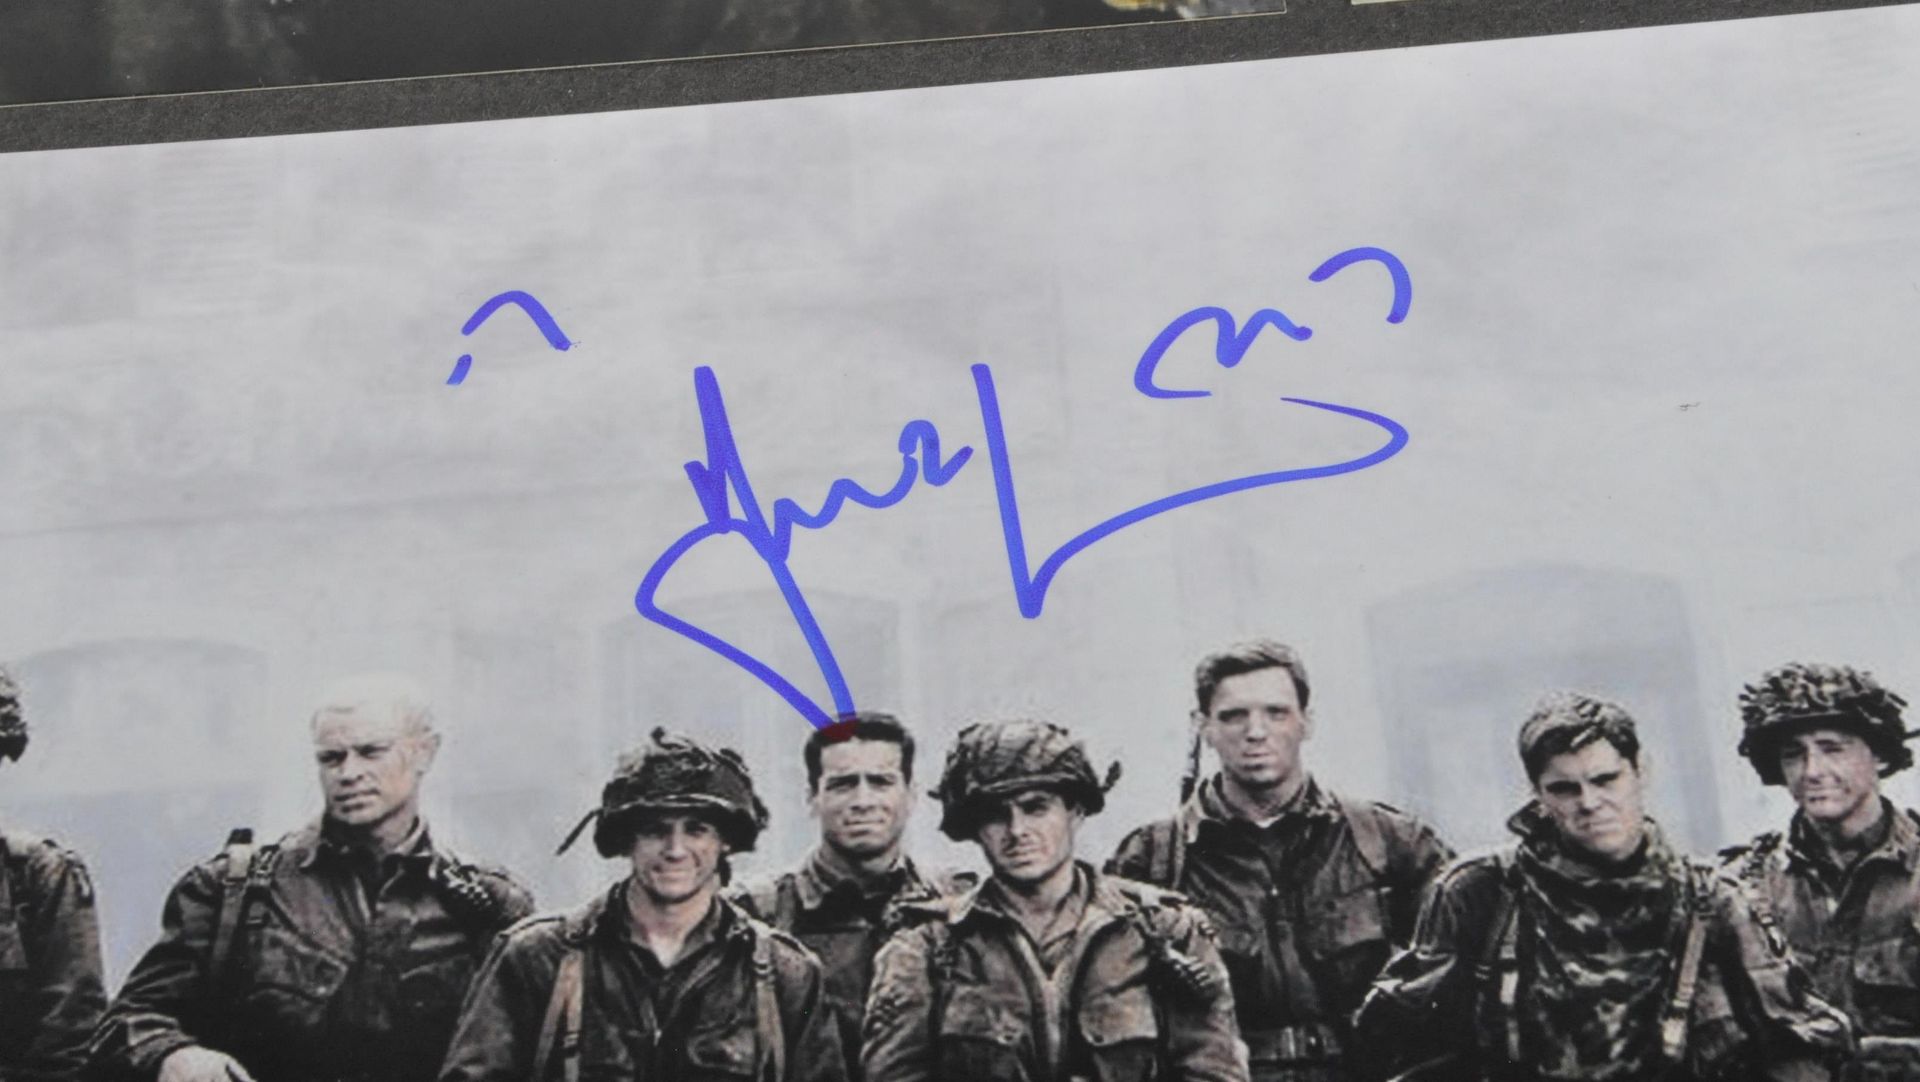 BAND OF BROTHERS - COLLECTION OF SIGNED 8X10" PHOTOGRAPHS - Bild 4 aus 4